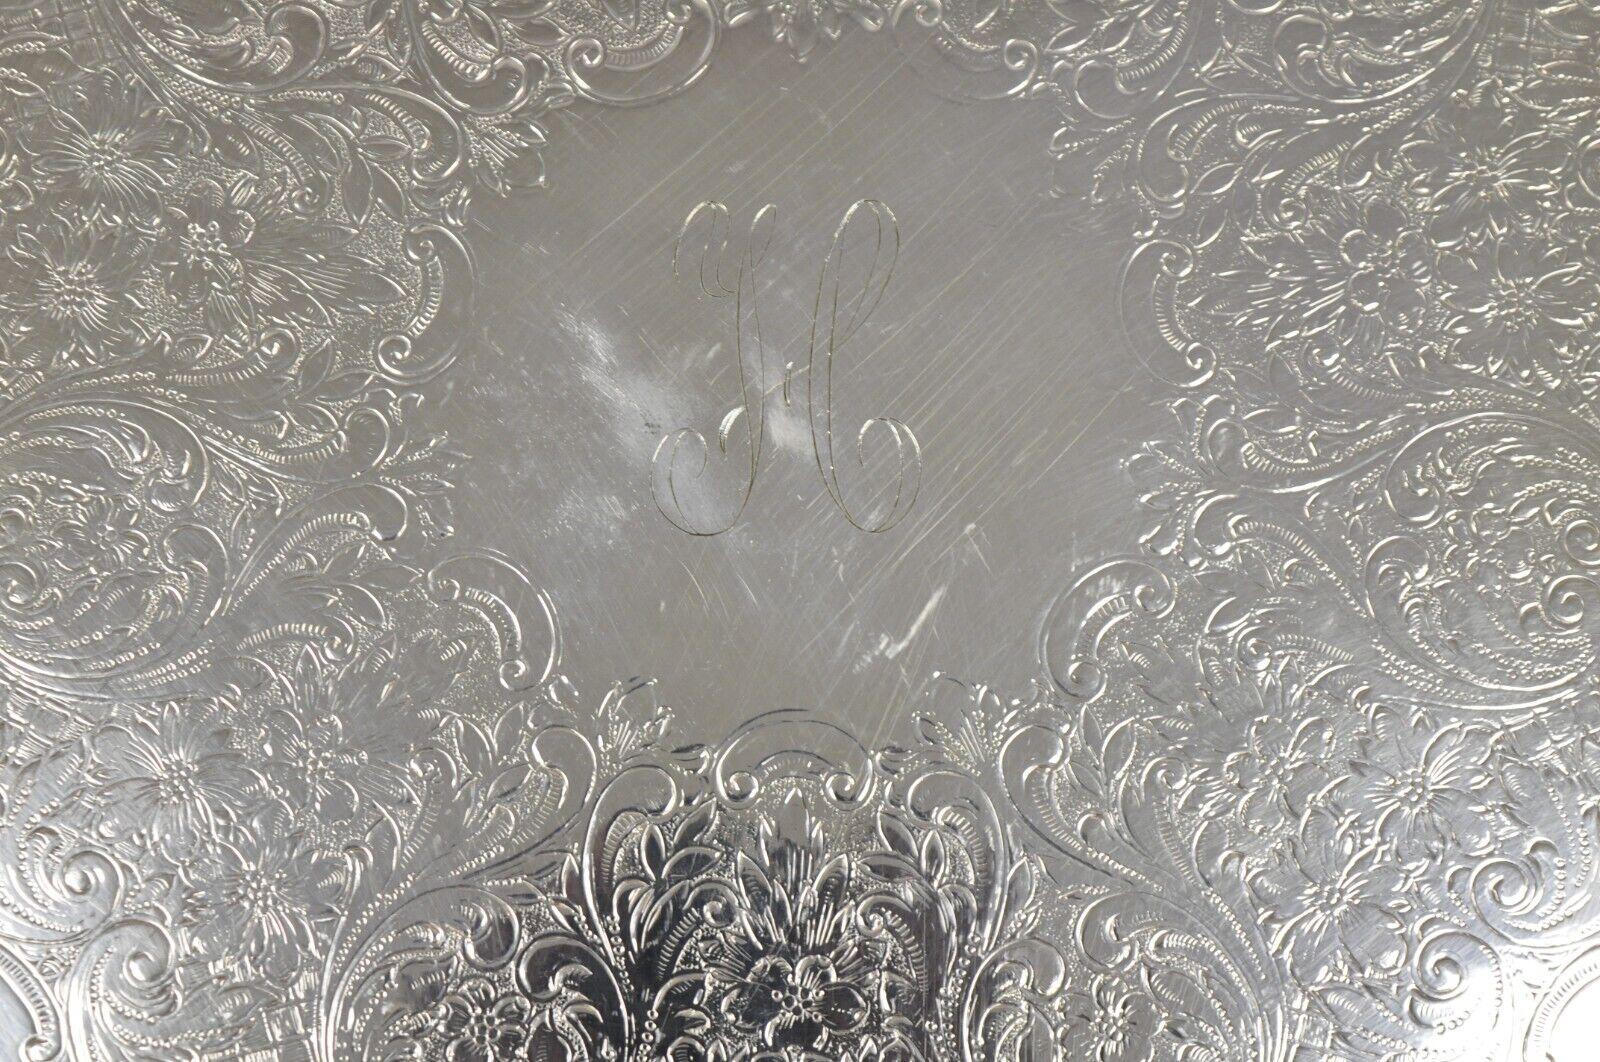 Vintage EPCA Silverplate by Poole 3216 Round Platter Tray - Engraved For Sale 5